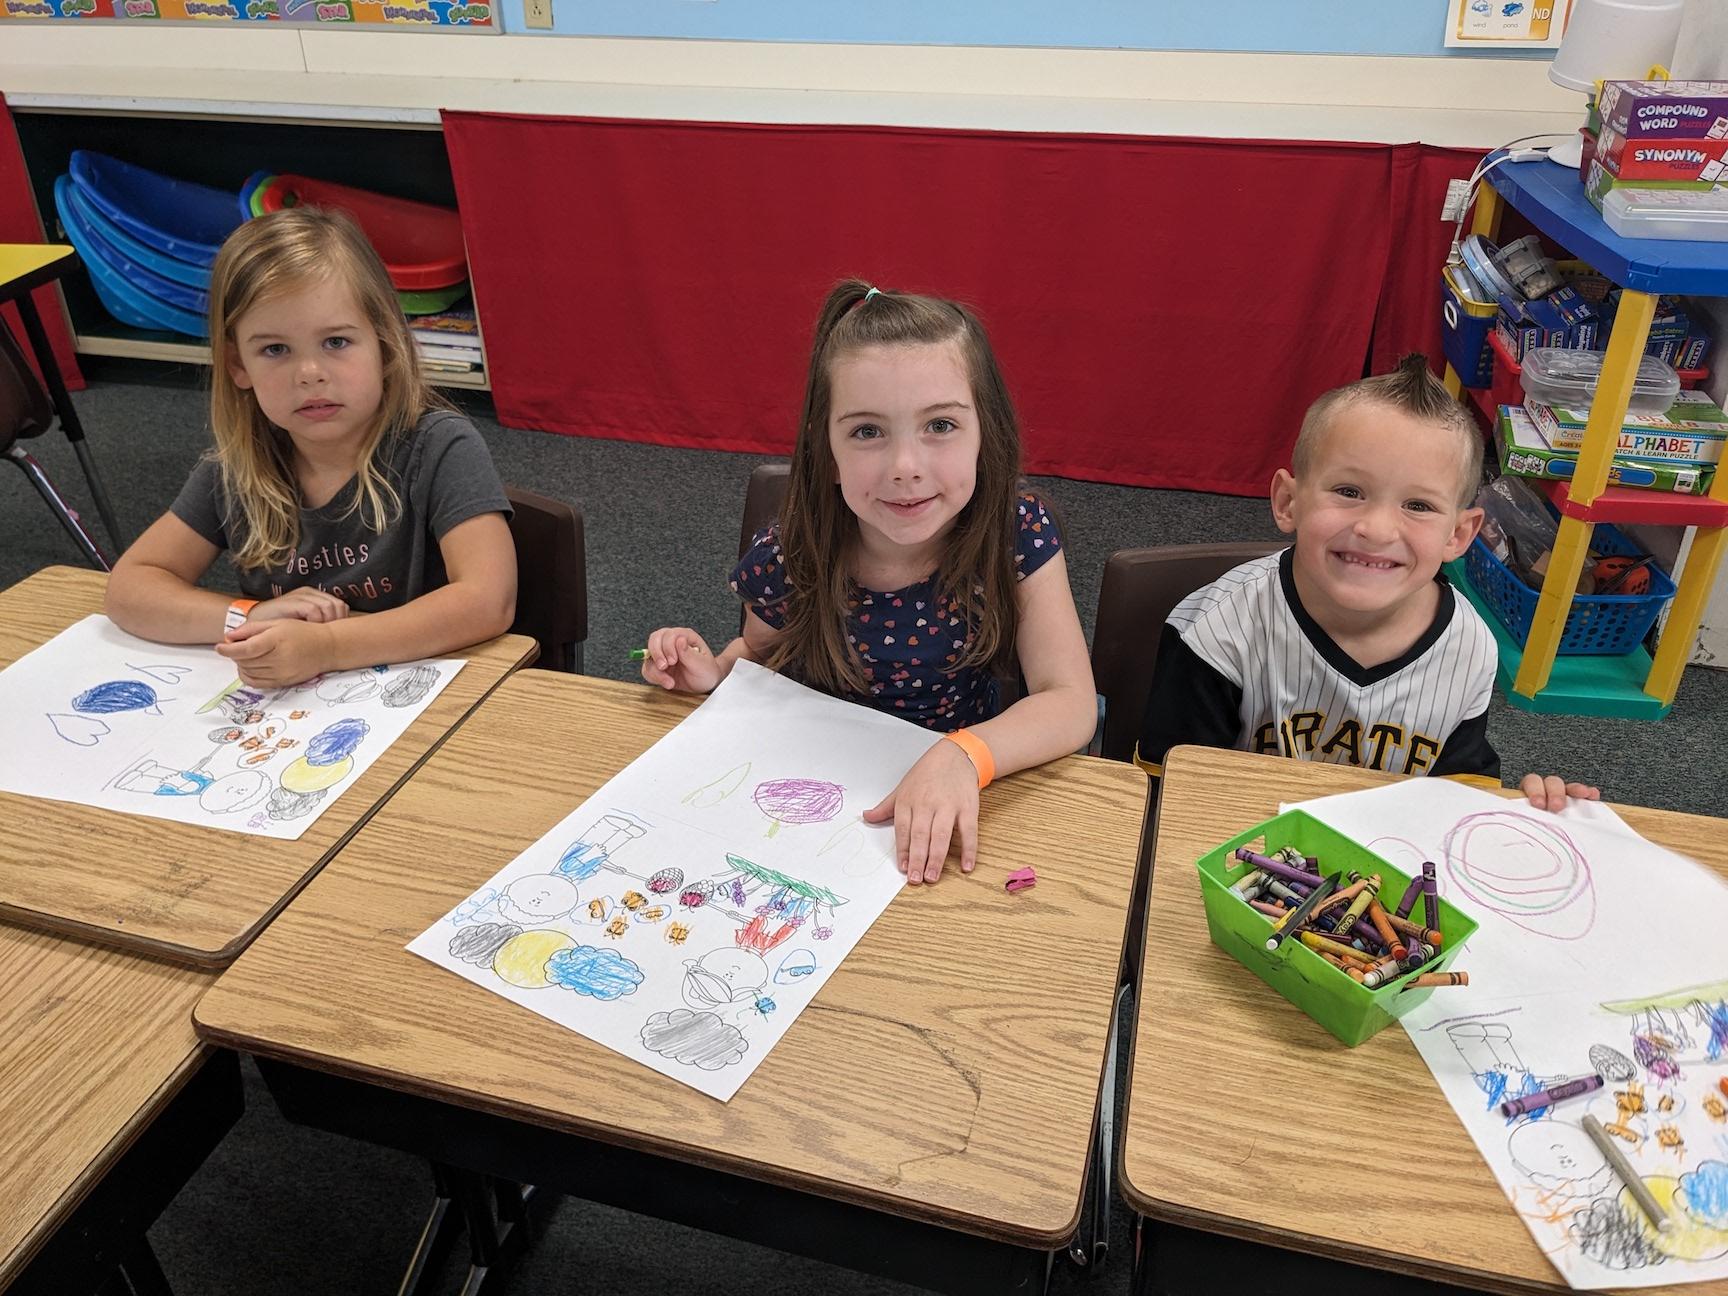 Rising kindergarteners Della Kasabian, Isla Scott, and Murphy Nutt enjoyed coloring and listening to stories about manners